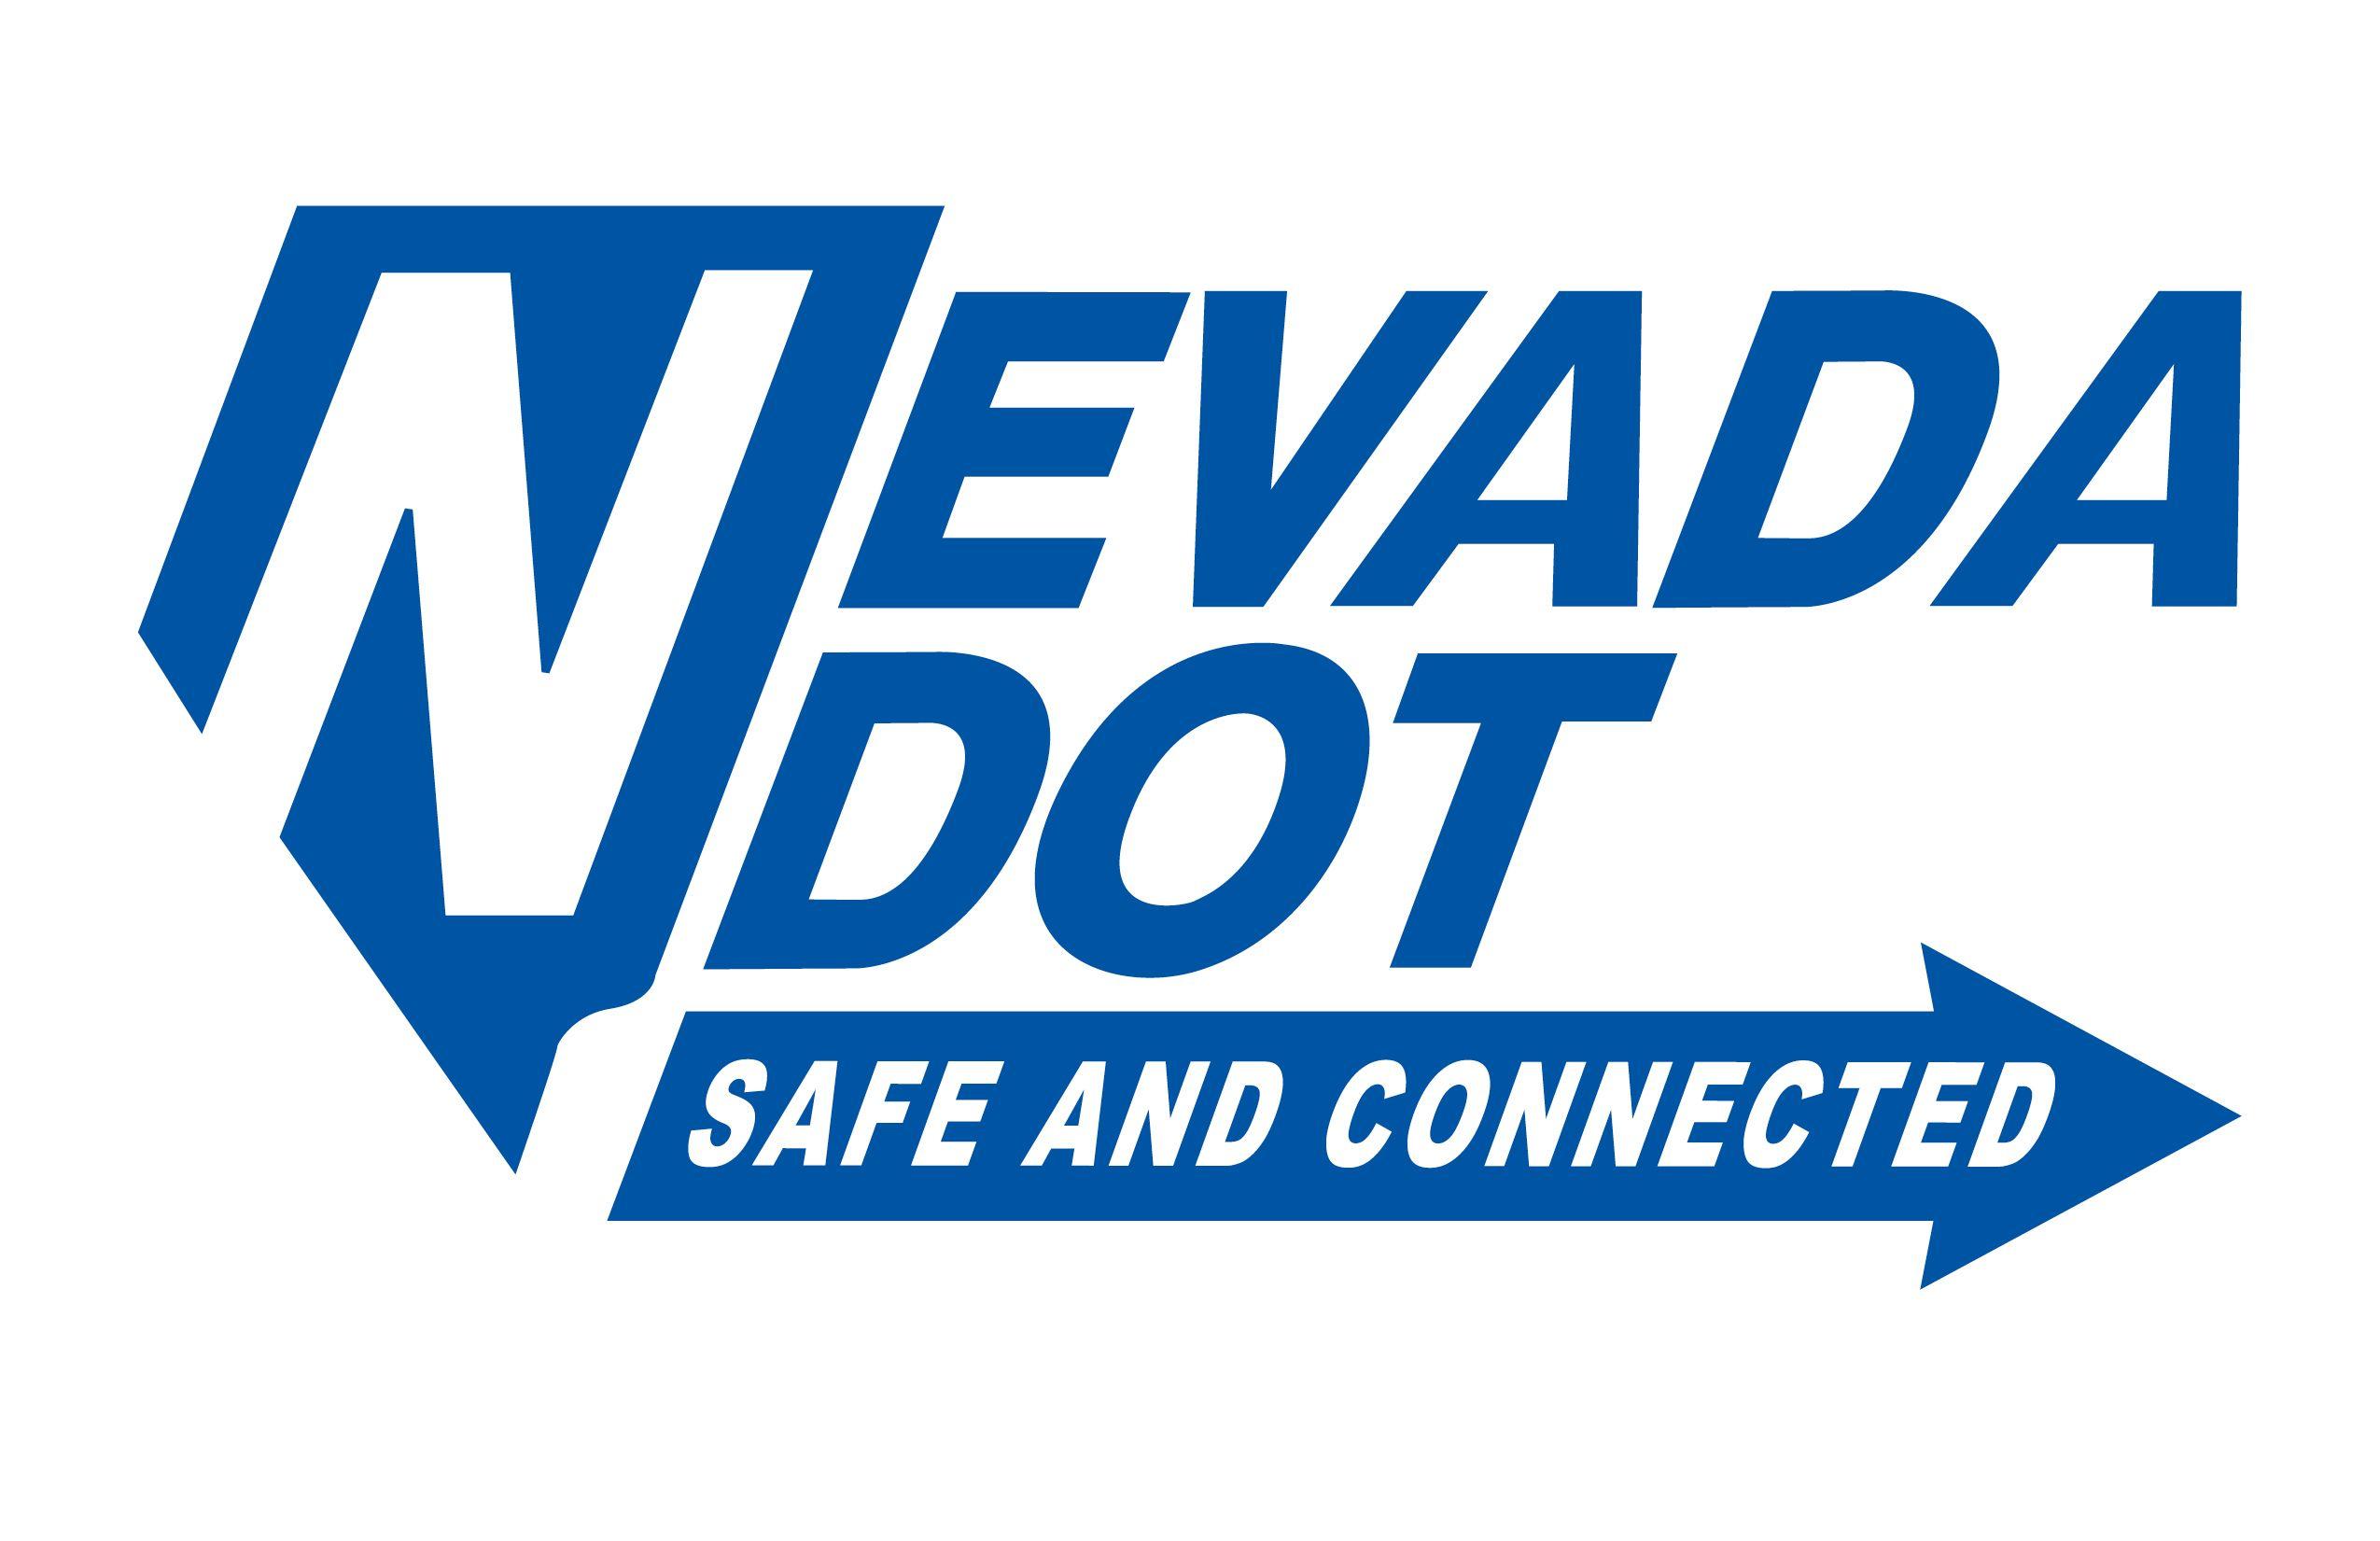 Nevada Dot Logo - Nevada Department of Transportation Launches New Brand and Logo